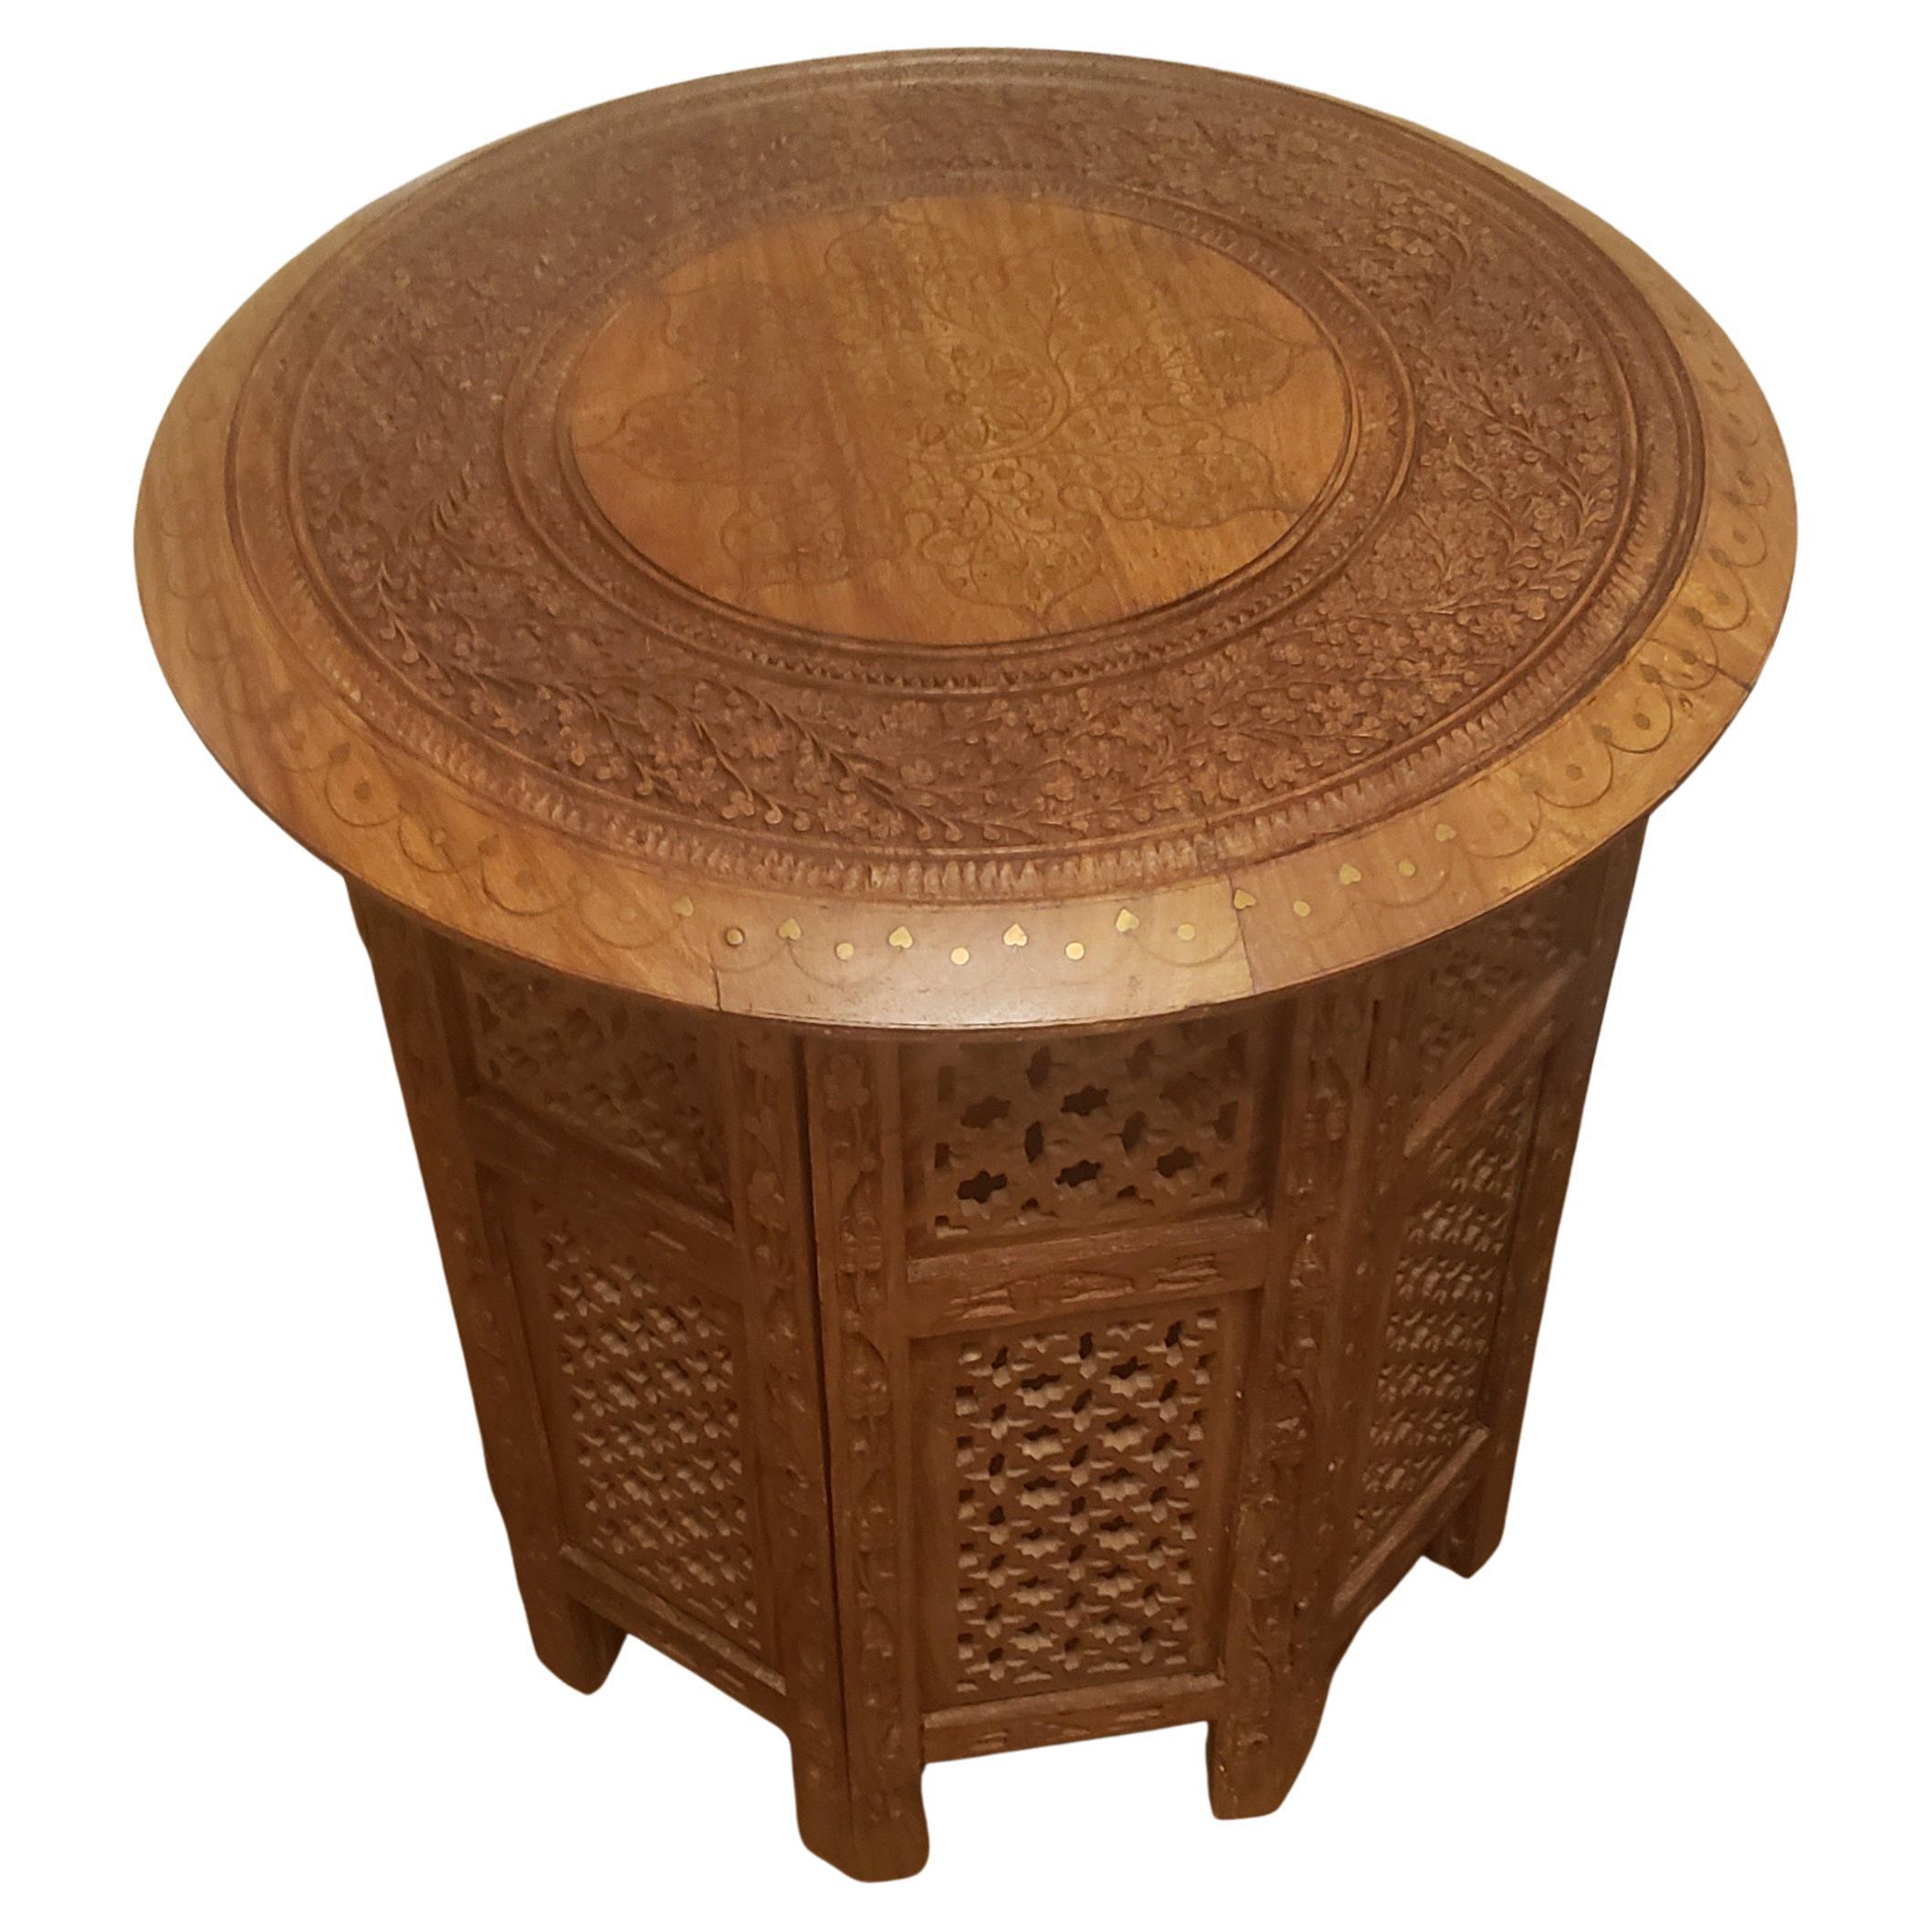 1950s Anglo-Indian Octagonal finely hand carved teak side table with intricate brass inlays in the center top and around the top. Table is collapsible, making it a great space saver. Table measures 18